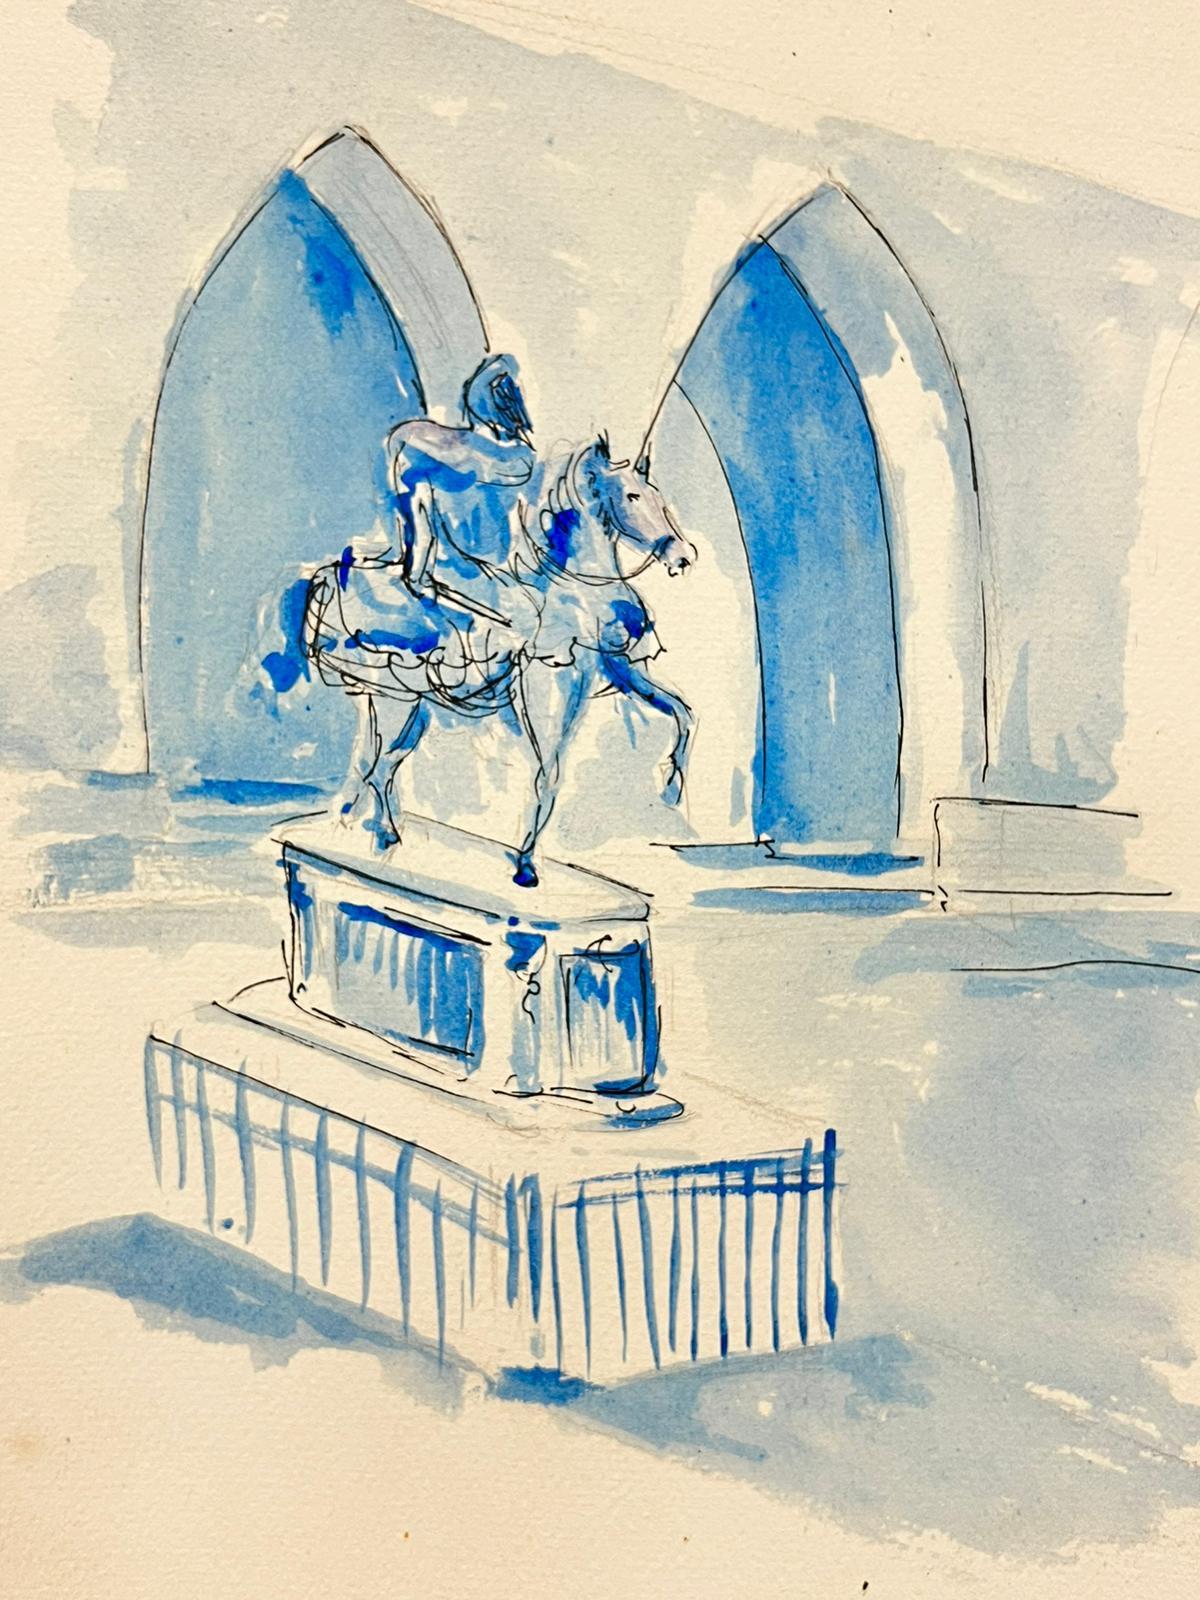 Bernard Labbe Figurative Art - 1950's Modernist/ Cubist Painting - Blue Watercolor Knight and Horse Statue